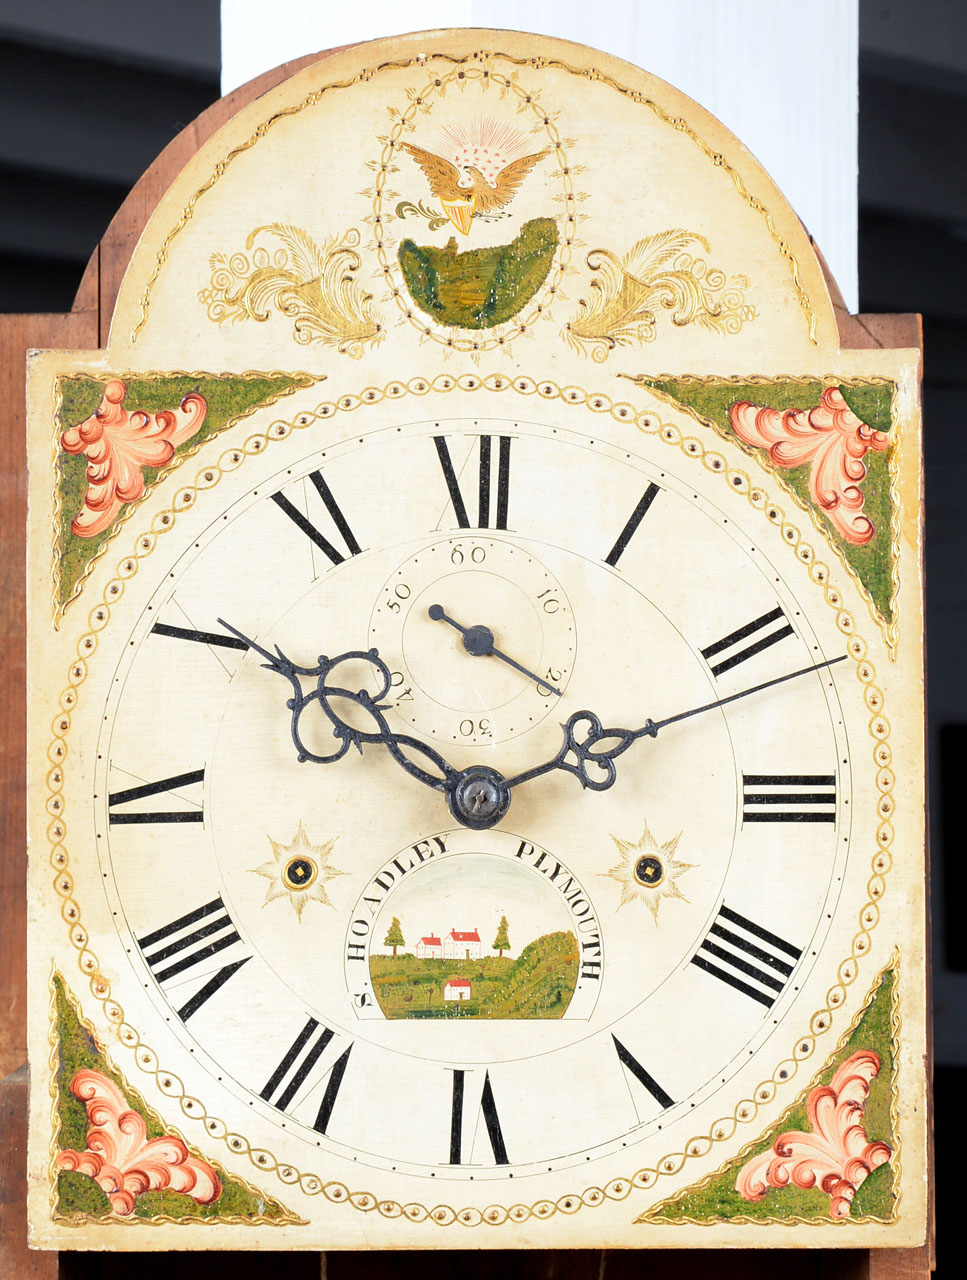 A paint-decorated tall clock detail